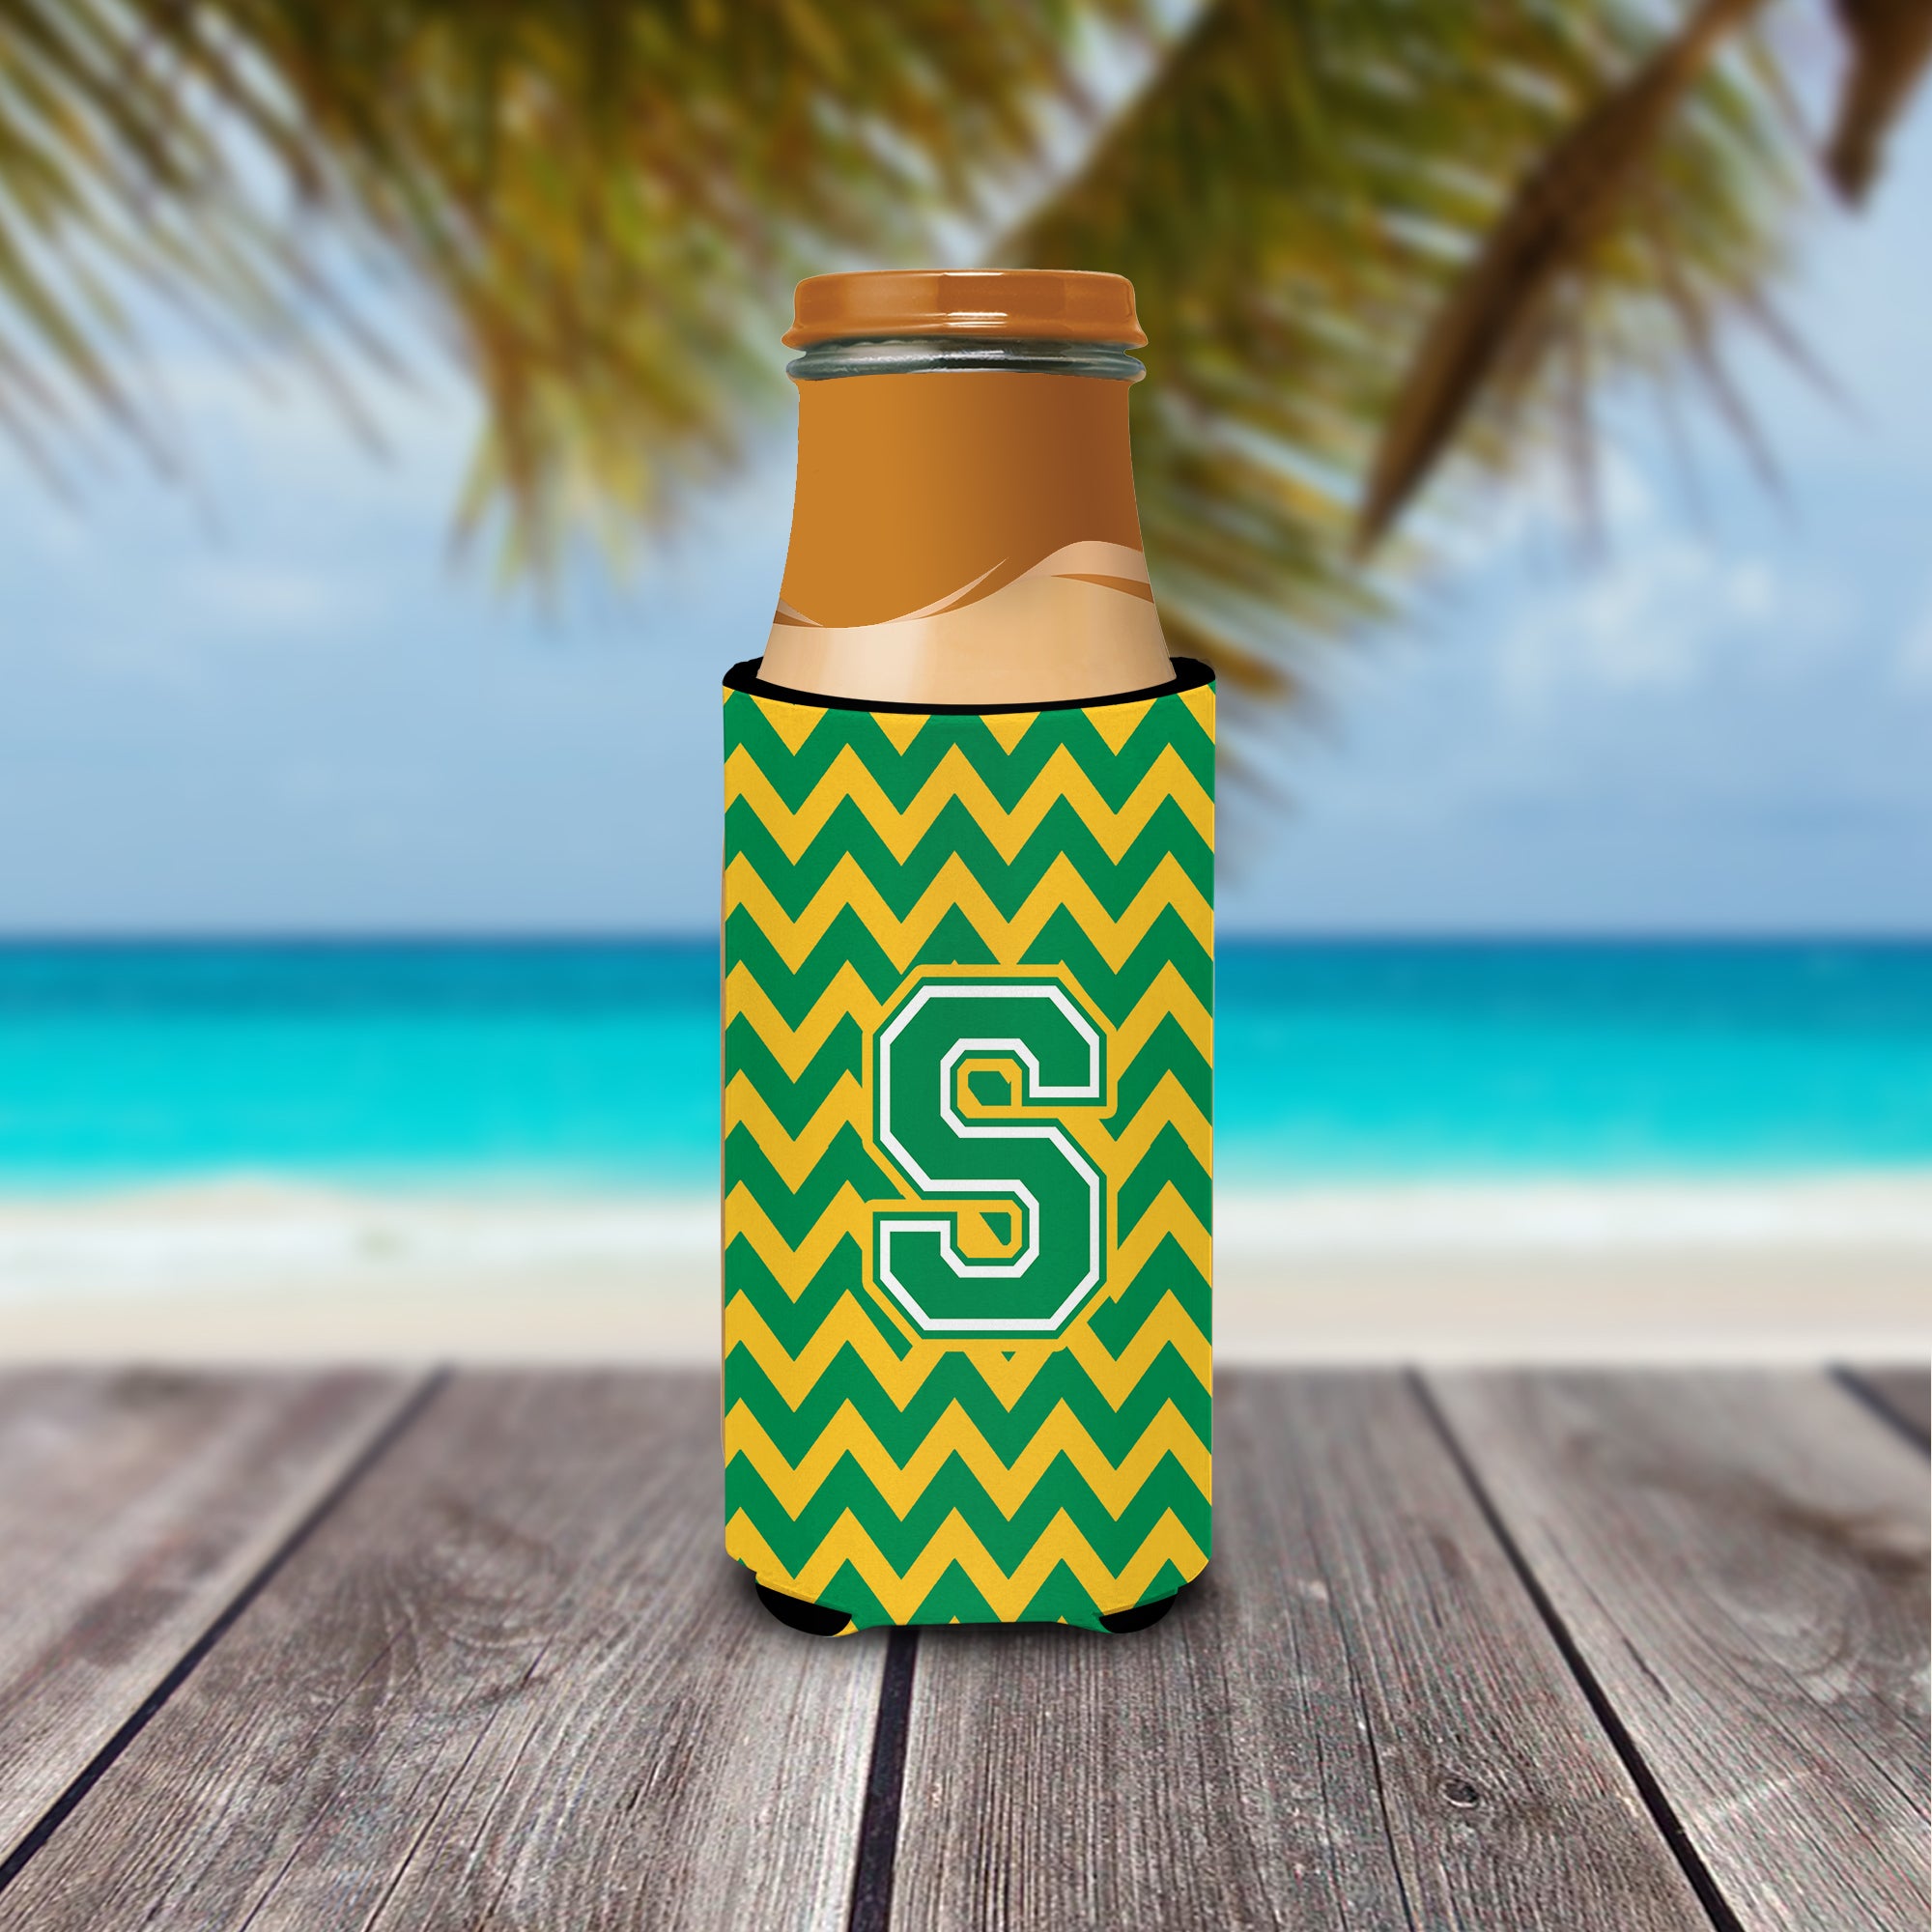 Letter S Chevron Green and Gold Ultra Beverage Insulators for slim cans CJ1059-SMUK.